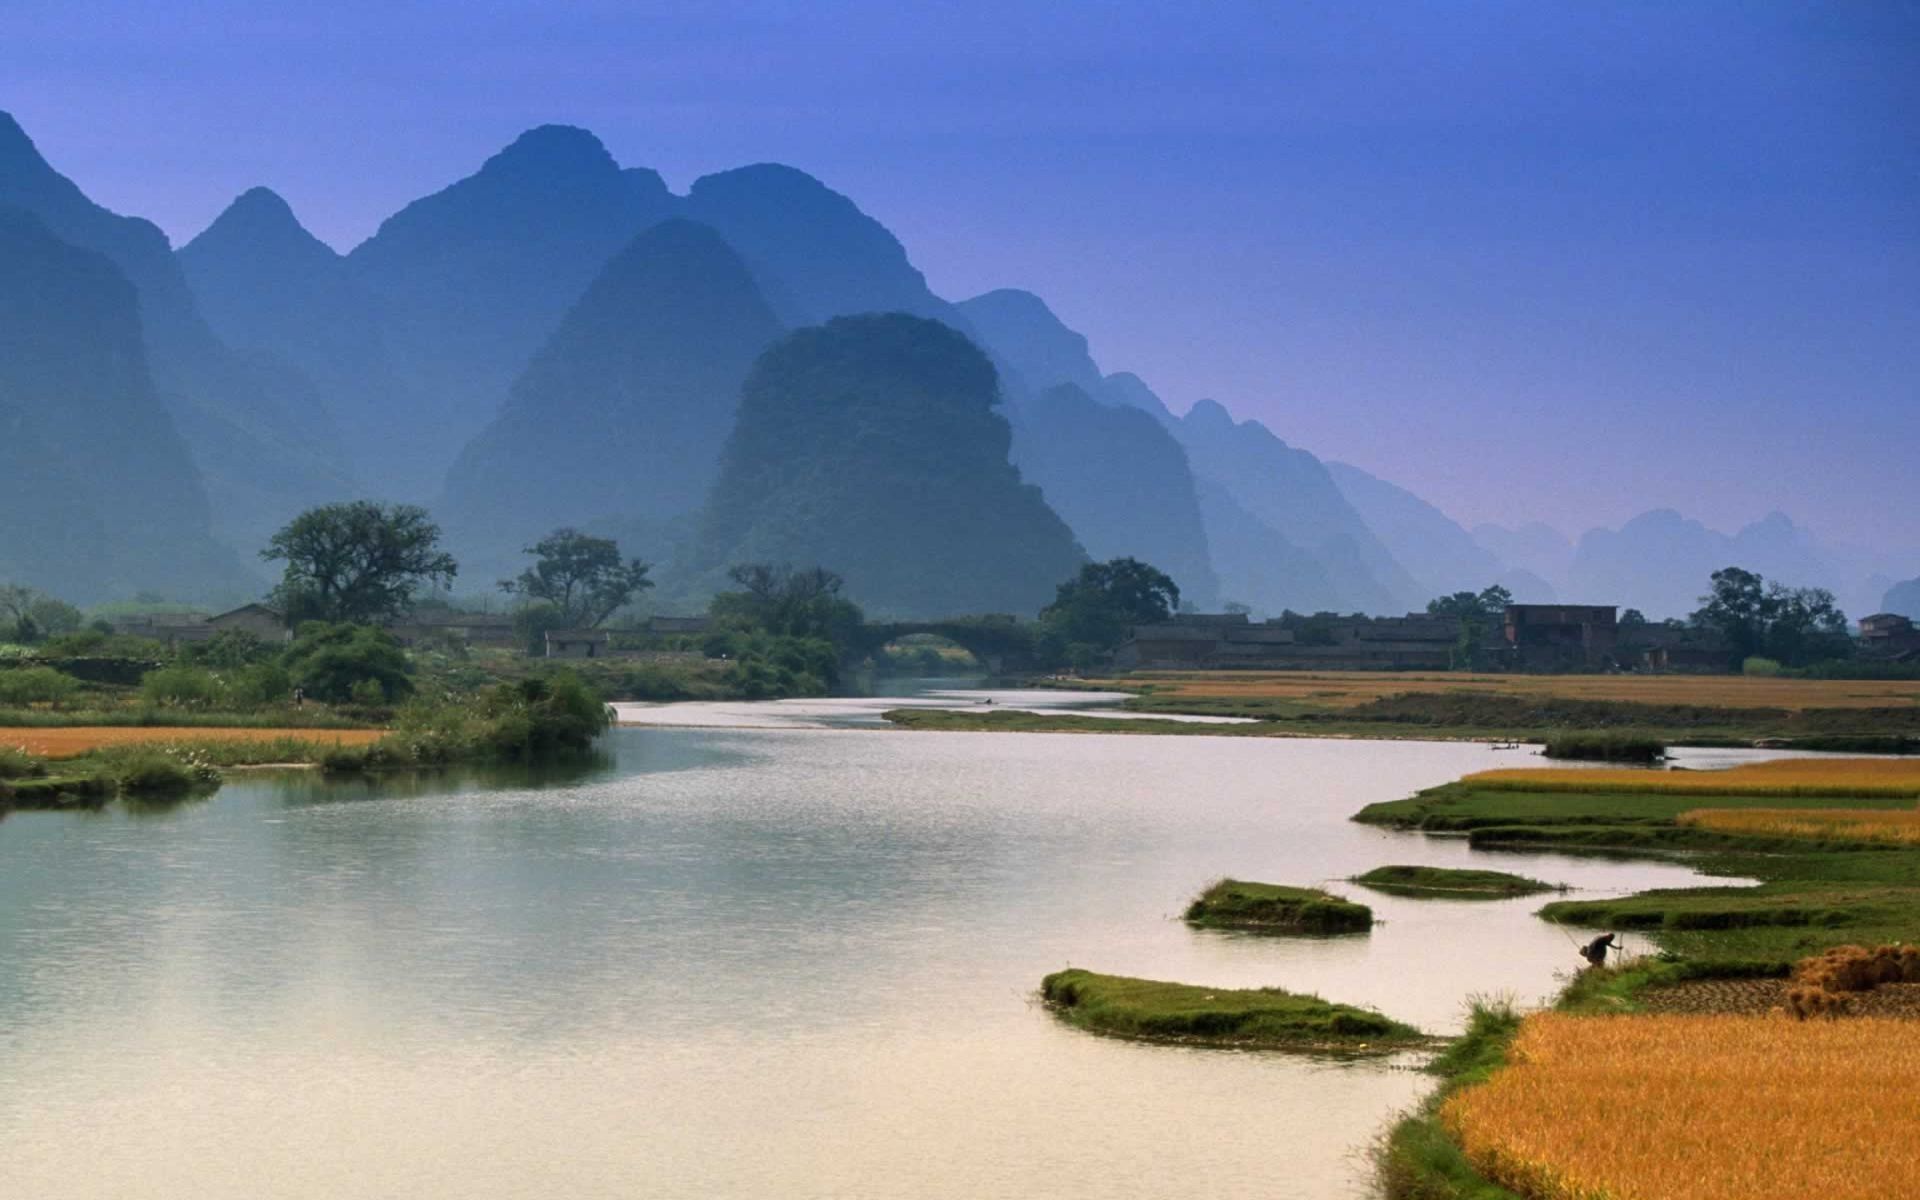 Guilin Wallpaper Google Search Mountain Image Traveling By